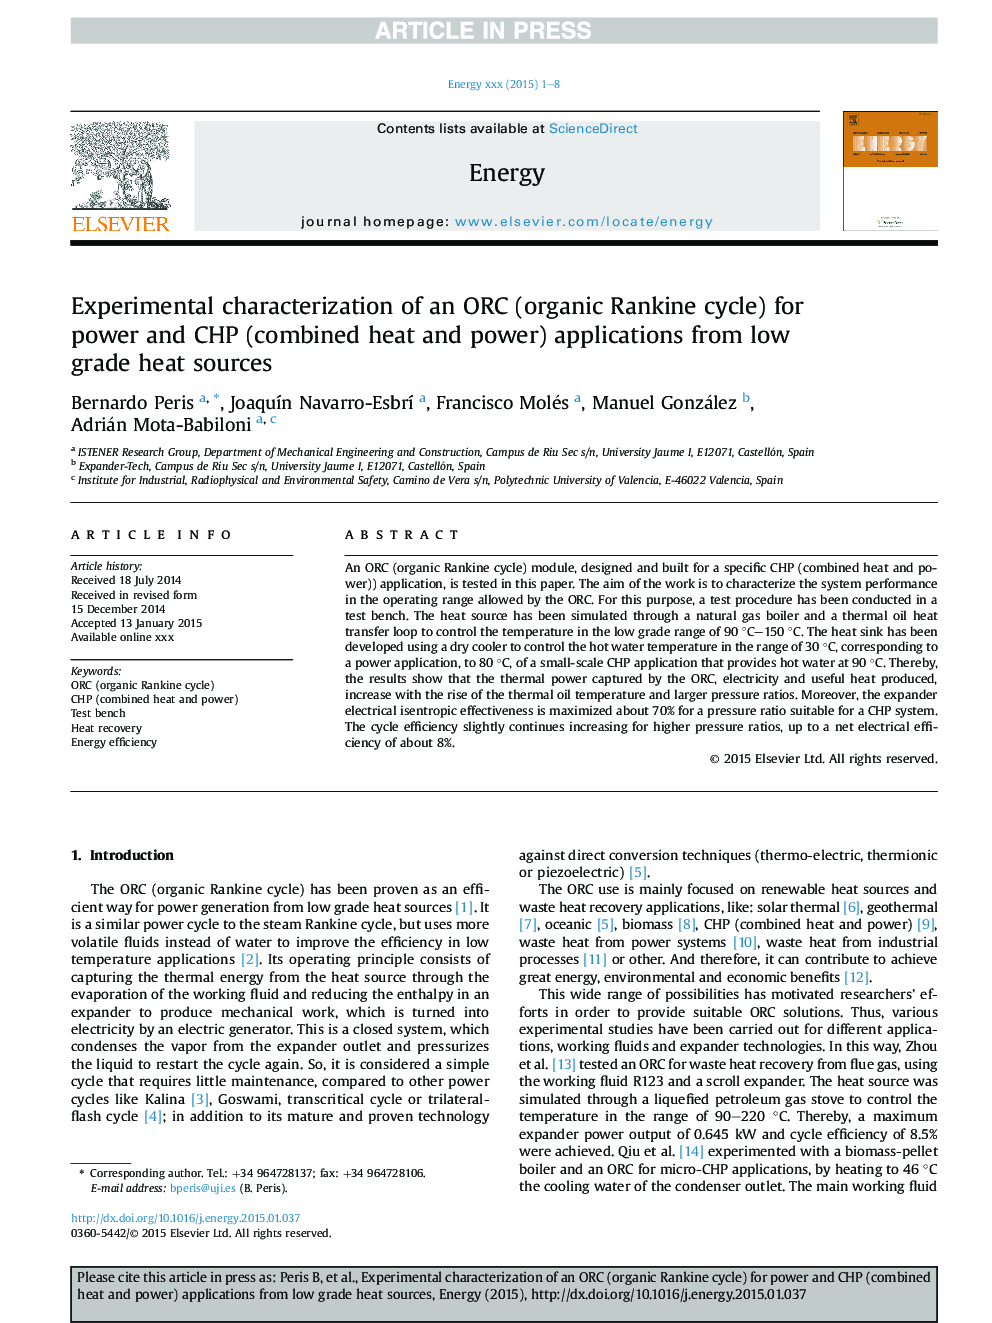 Experimental characterization of an ORC (organic Rankine cycle) for power and CHP (combined heat and power) applications from low grade heat sources